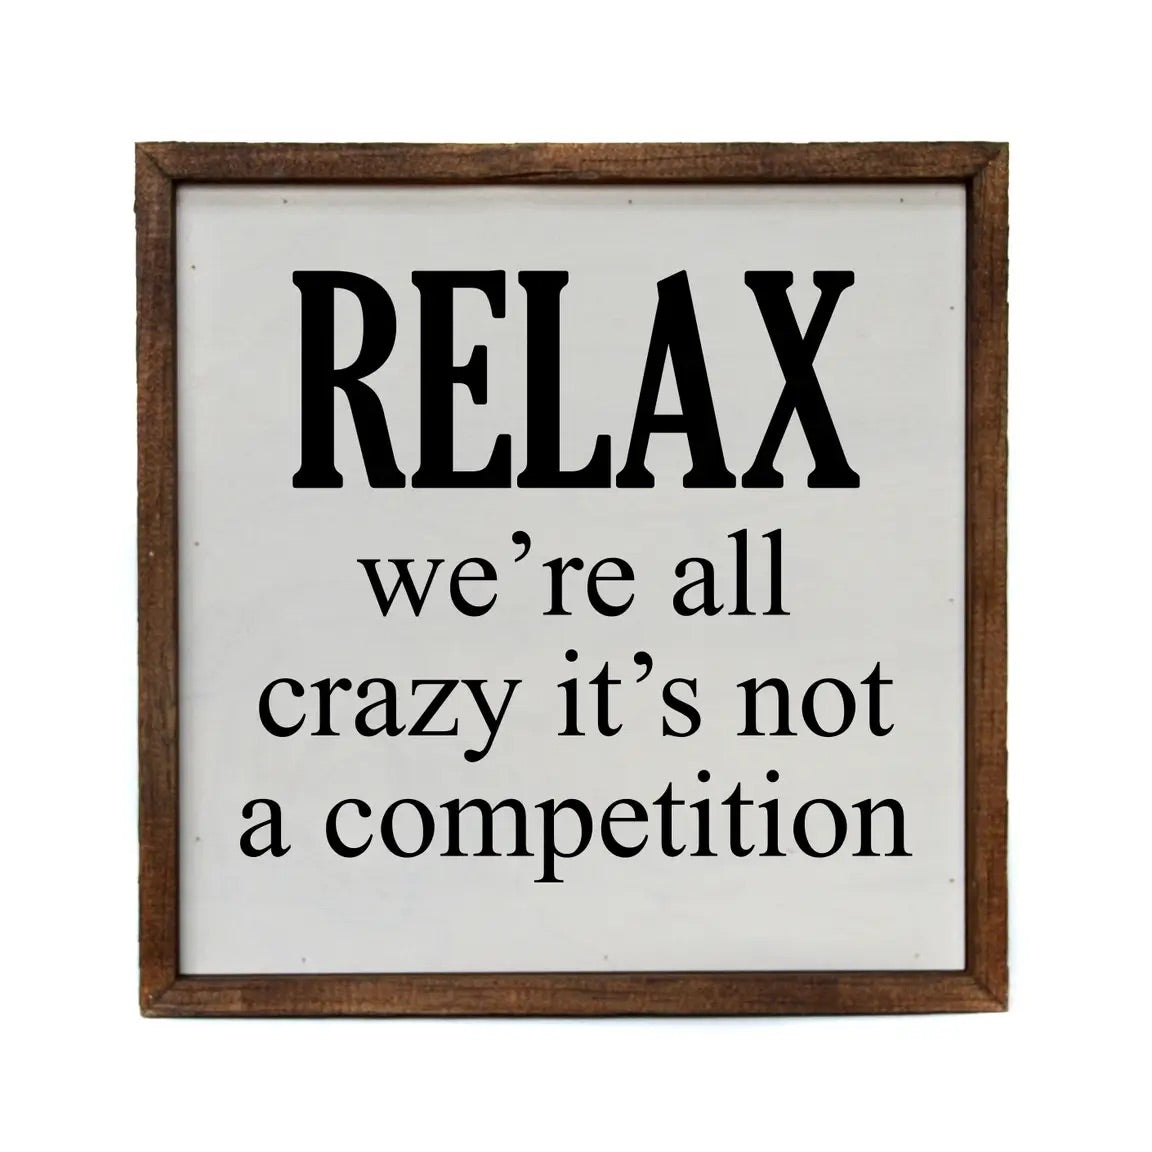 10x10 relax we’re all crazy